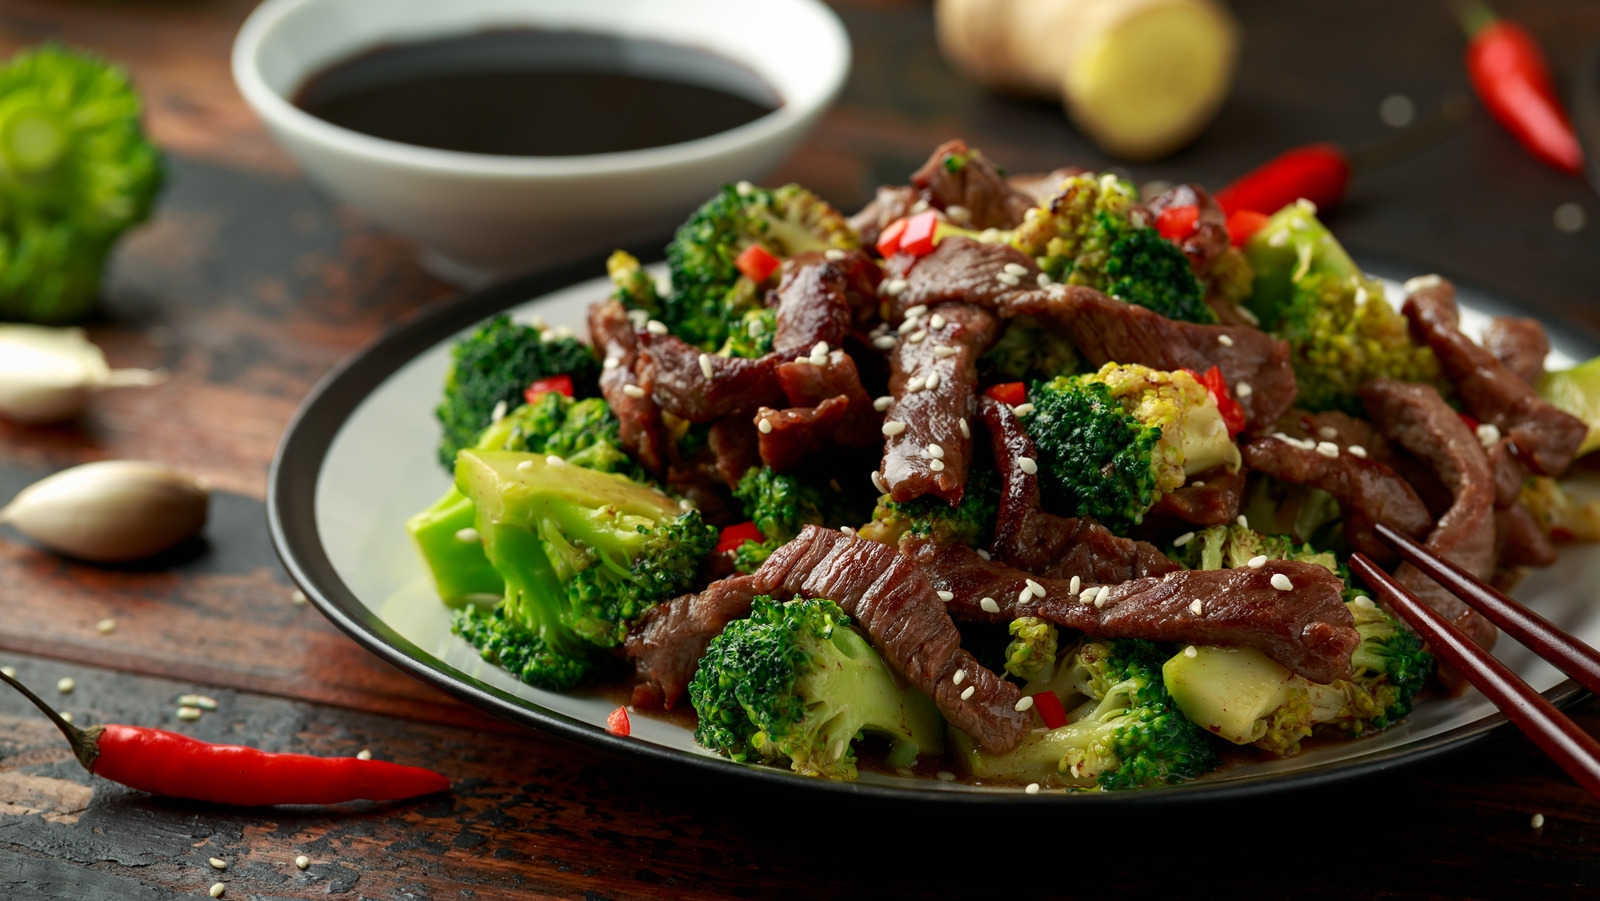 What Is The Best Type Of Meat For A Sizzling Stir-Fry?